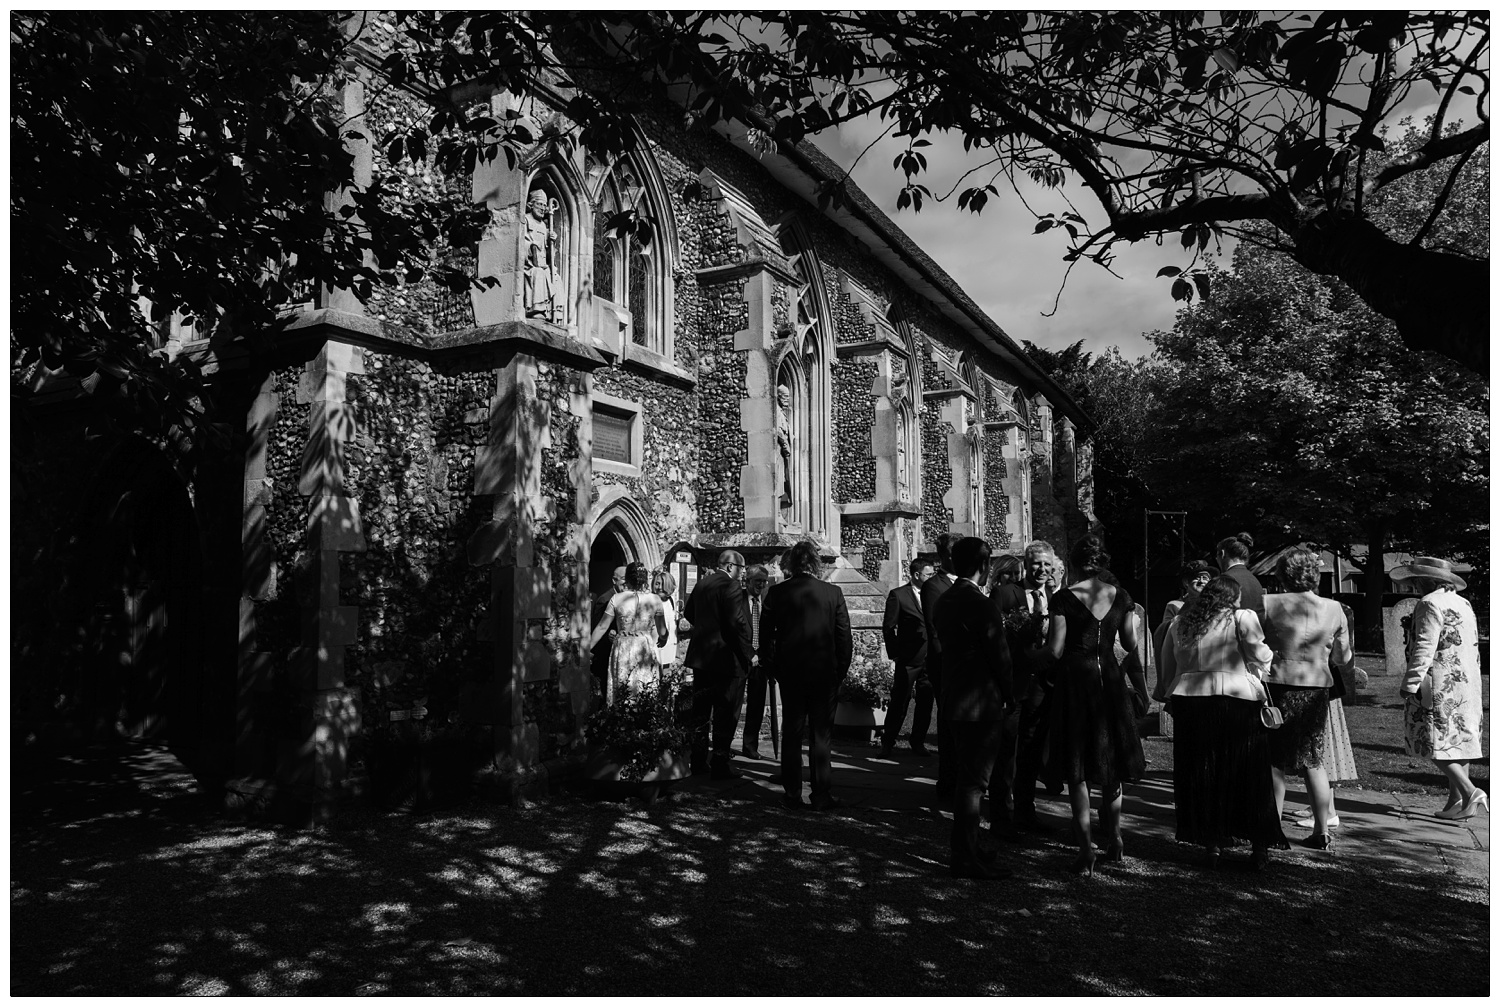 Black and white photograph of people outside St Peter's Church in Maldon. Trees can be seen at the top and left.